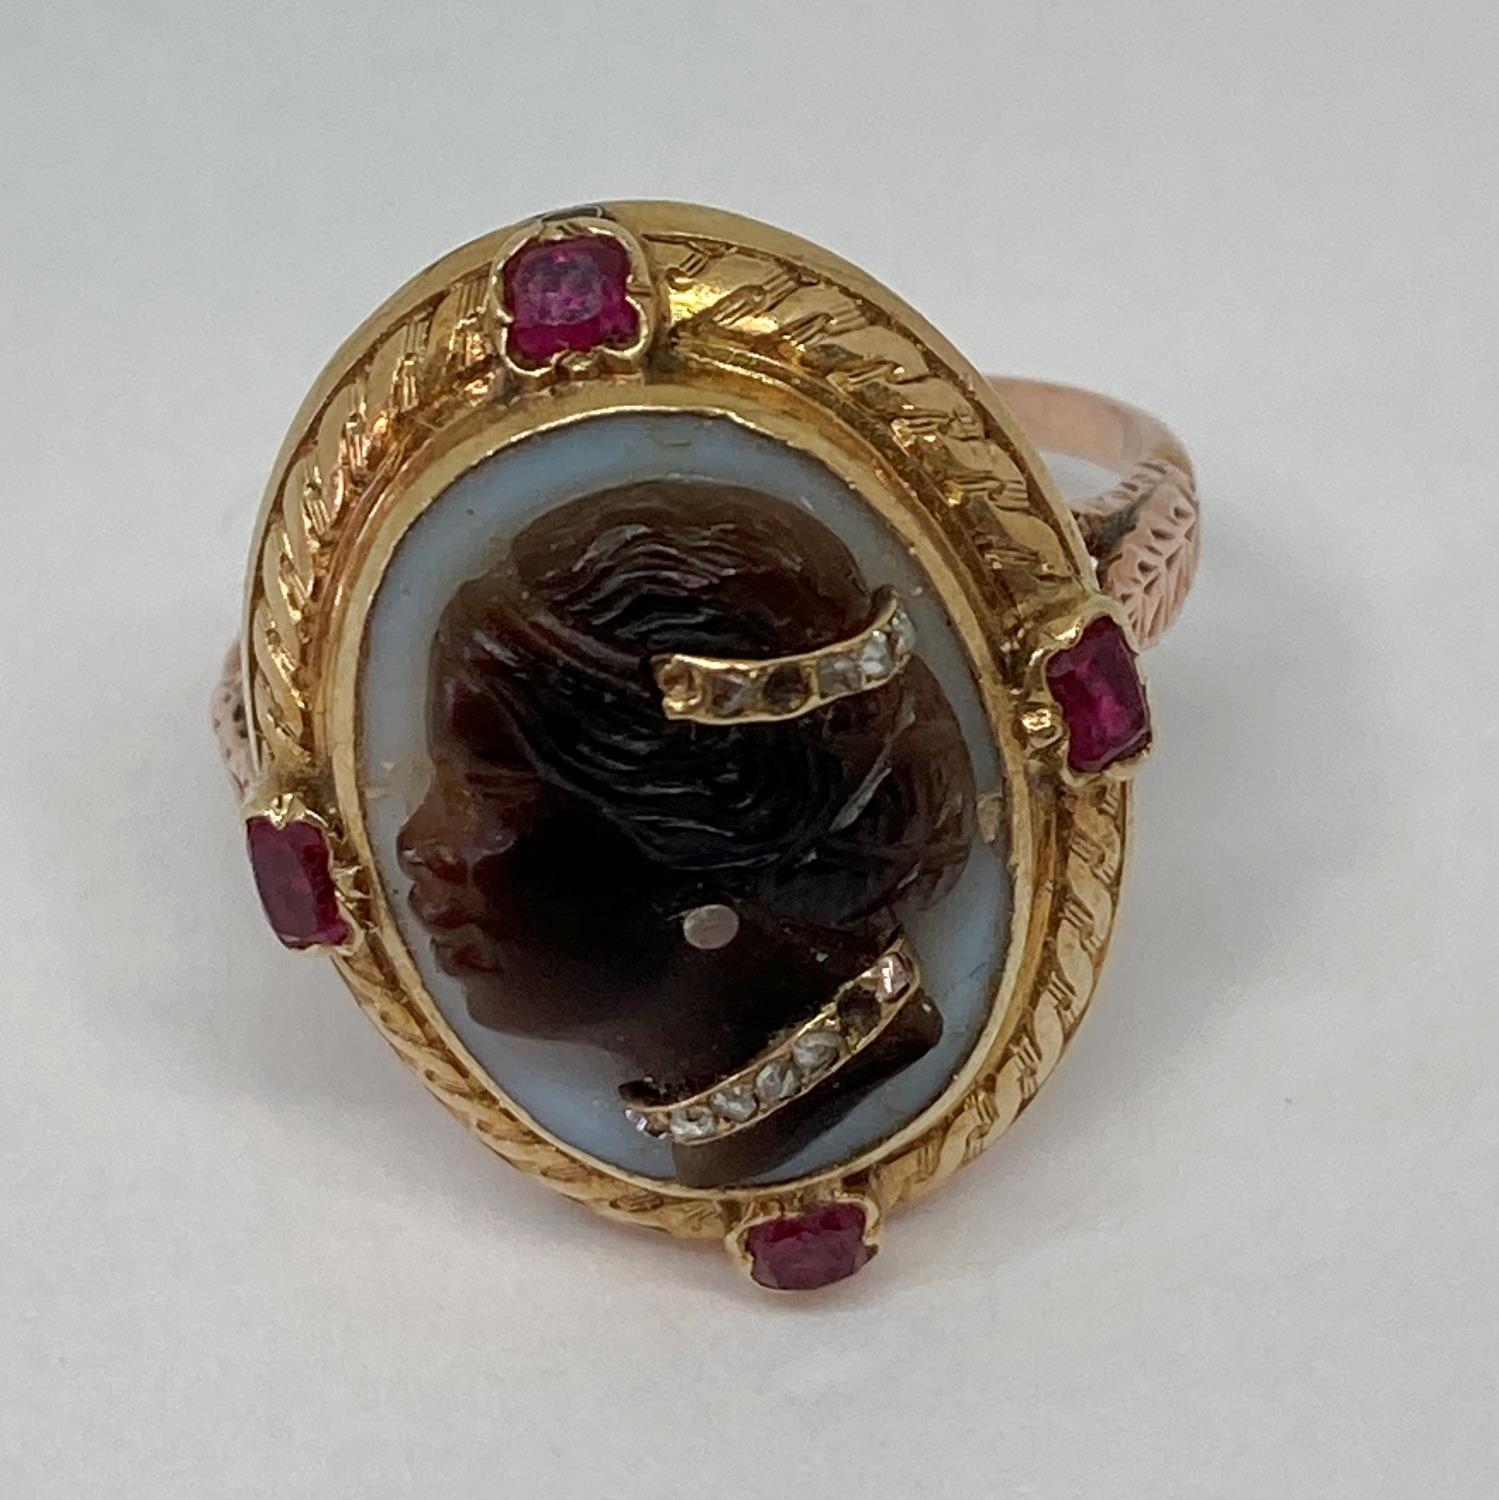 Fine antique blackamoor cameo ring depicting a lady, the agate cameo set with rose cut diamonds - Image 9 of 9